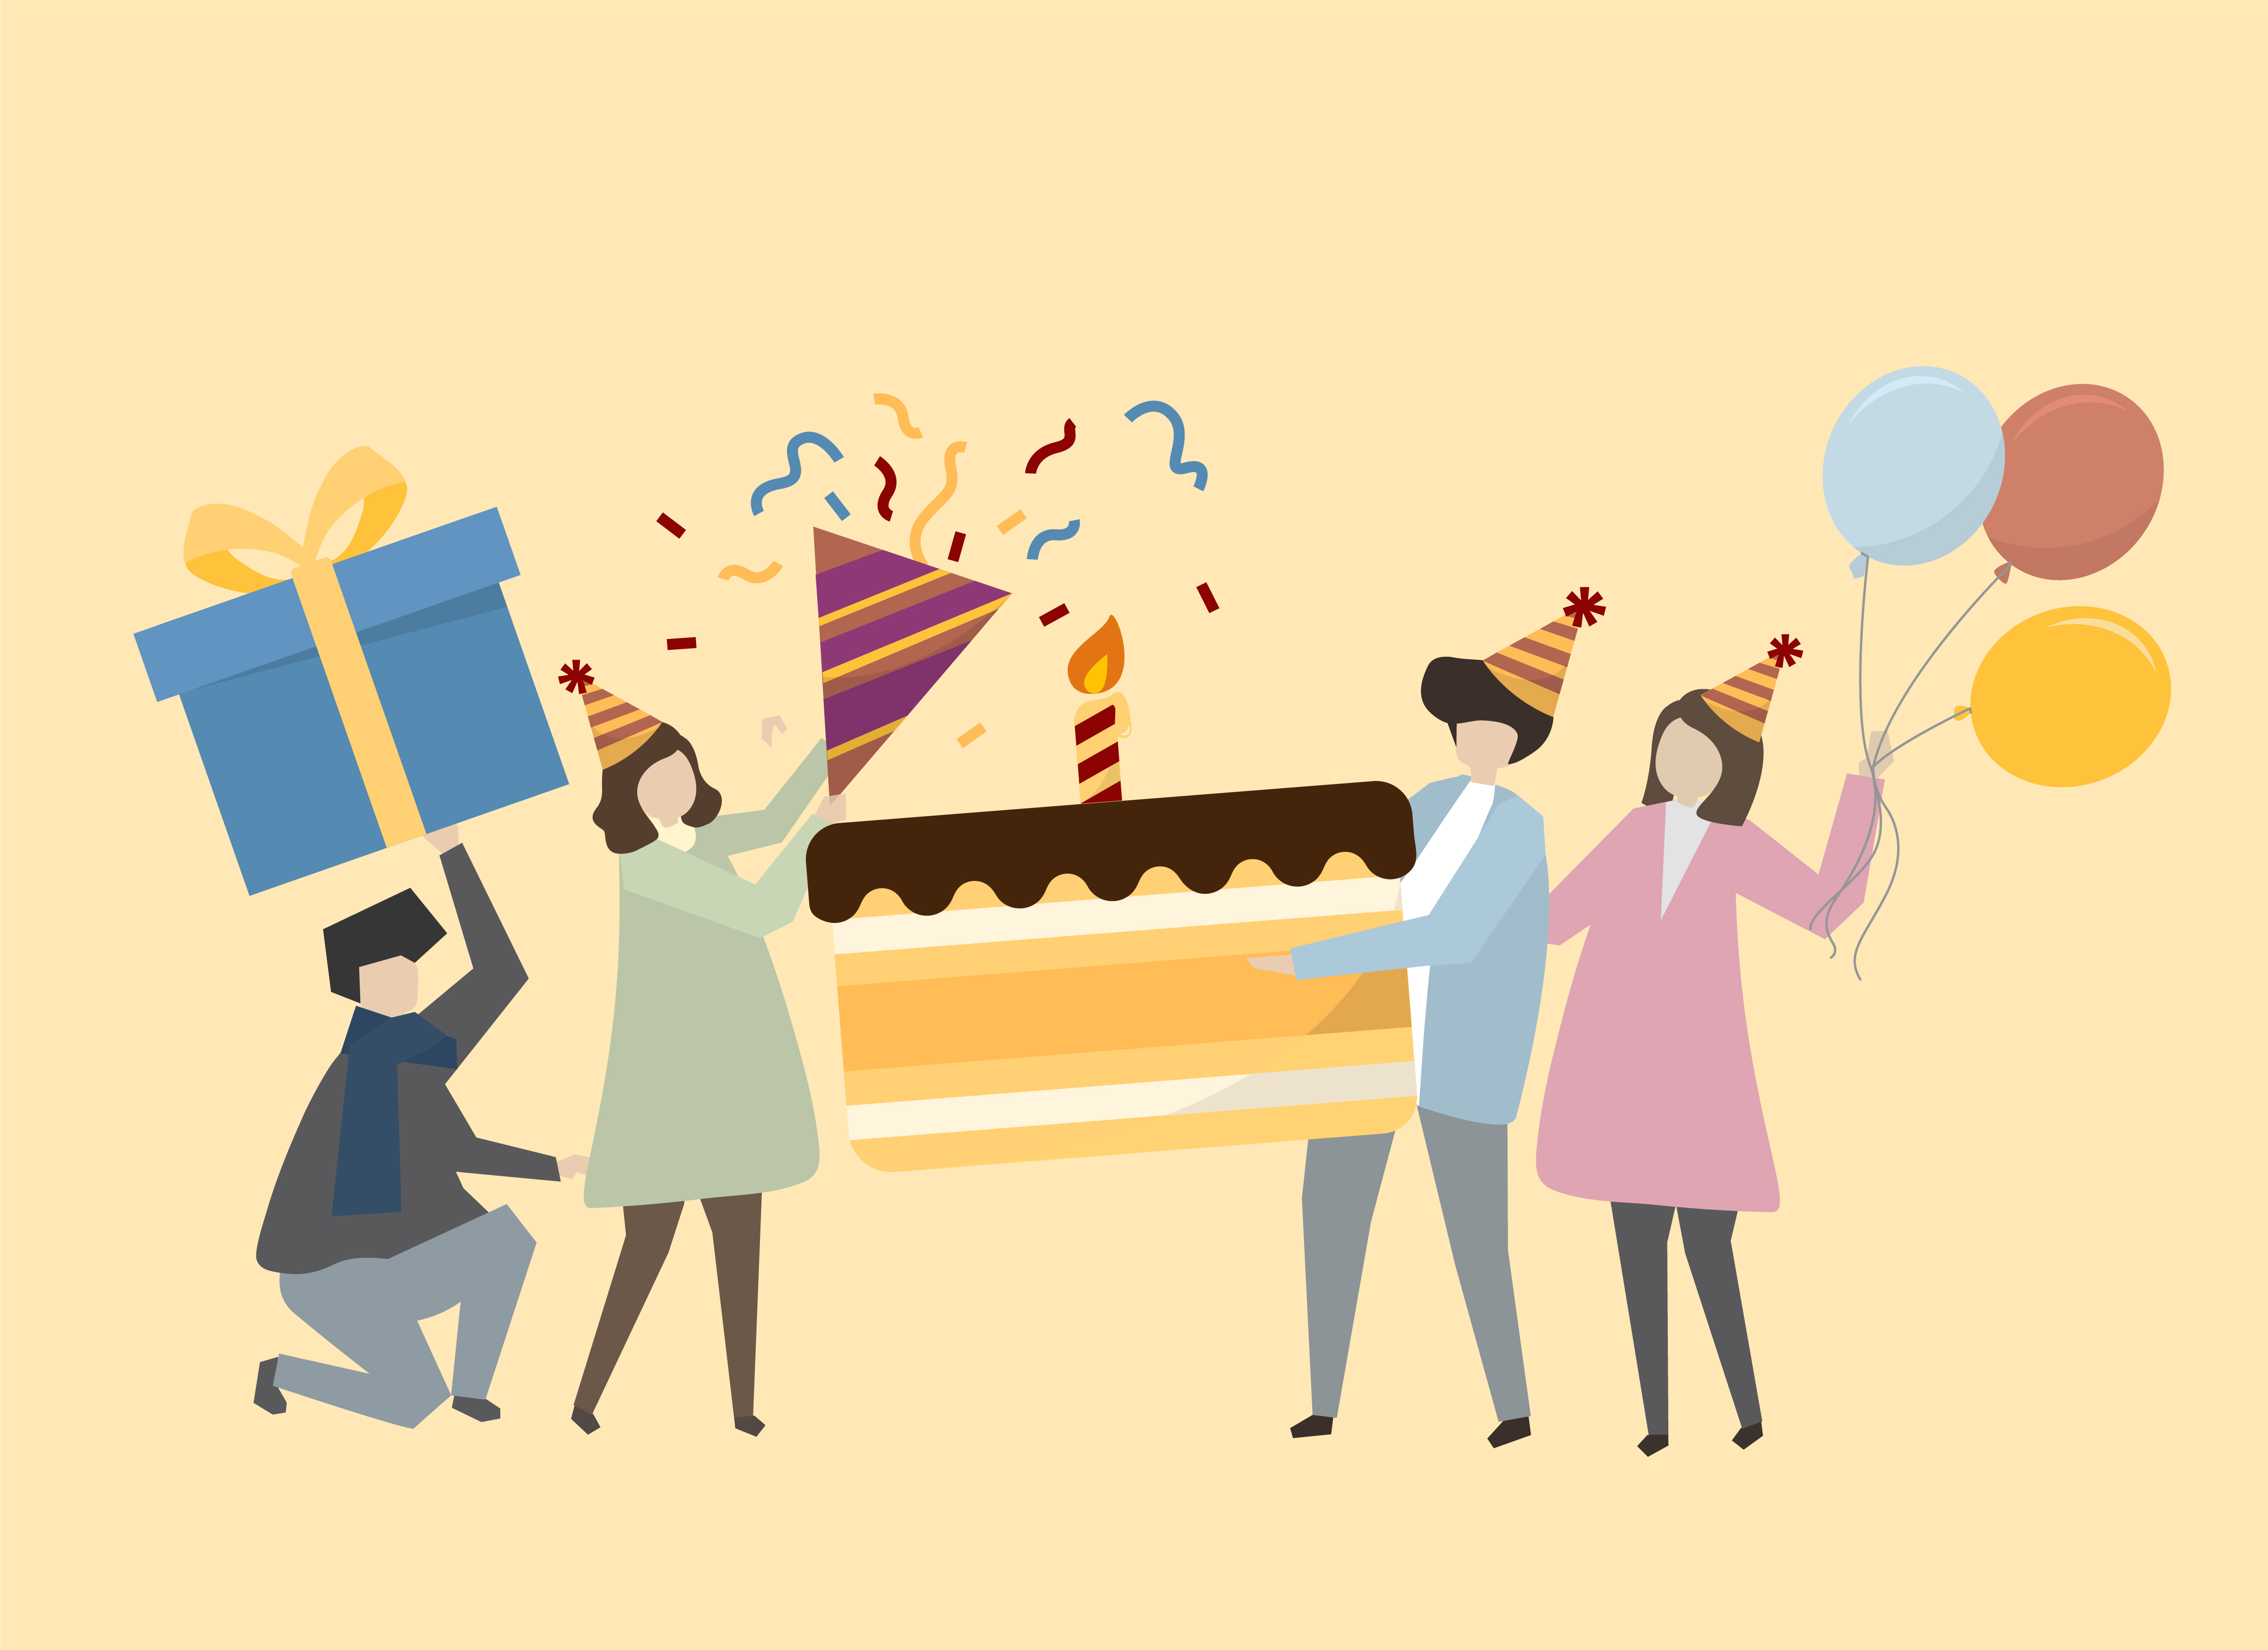 Happy people celebrating a birthday illustration - Download Free ...